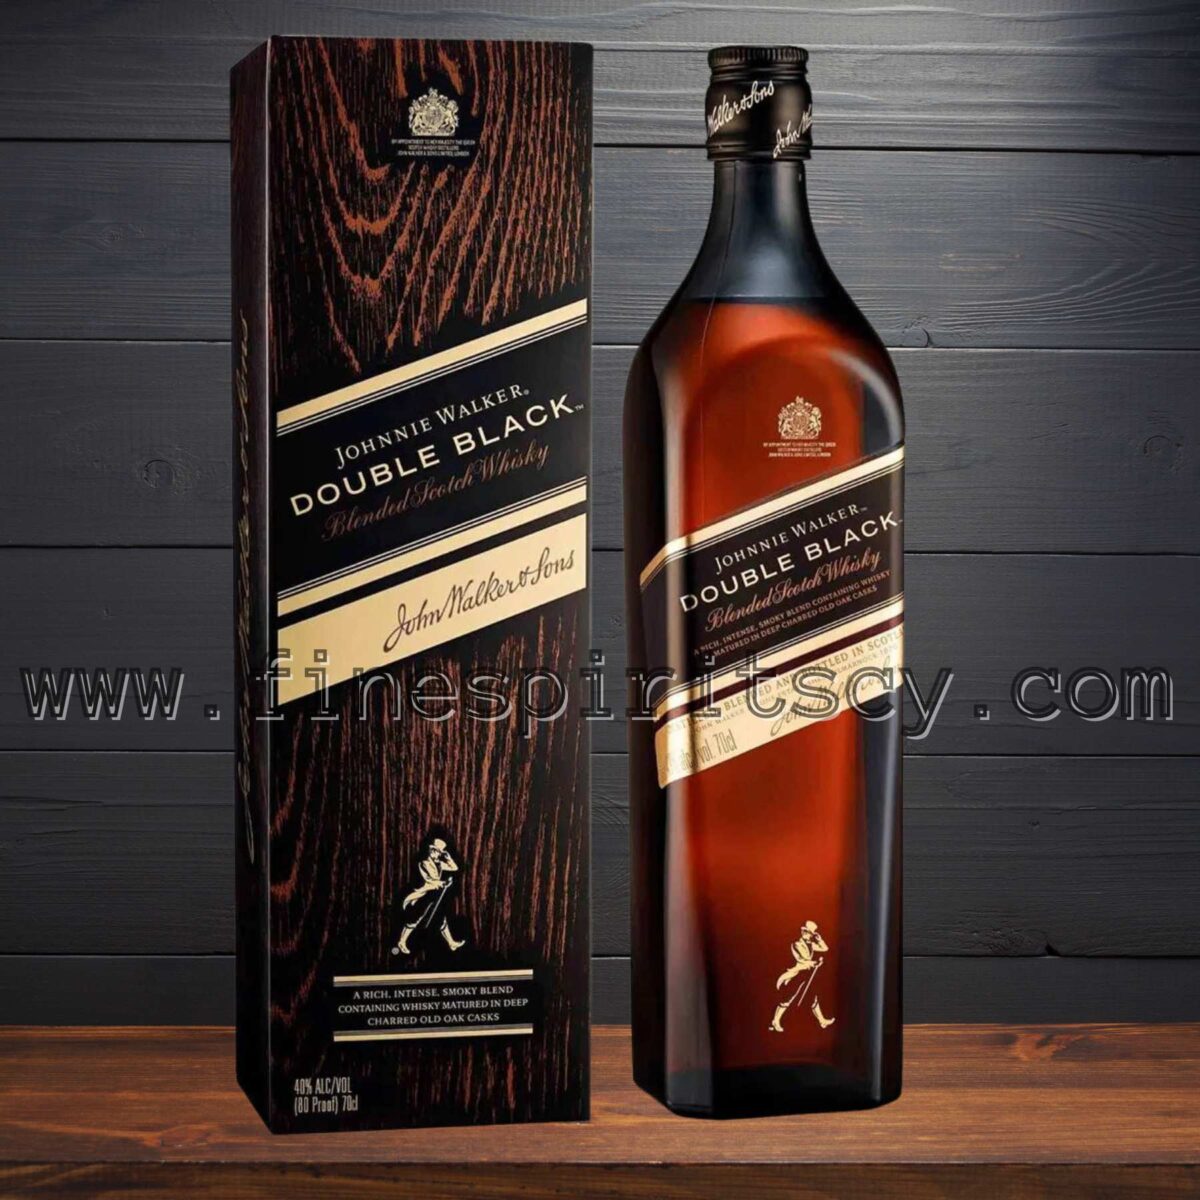 JW Double Black Cyprus Price Online Blended Scotch Whisky 700ml 70cl 0.7L